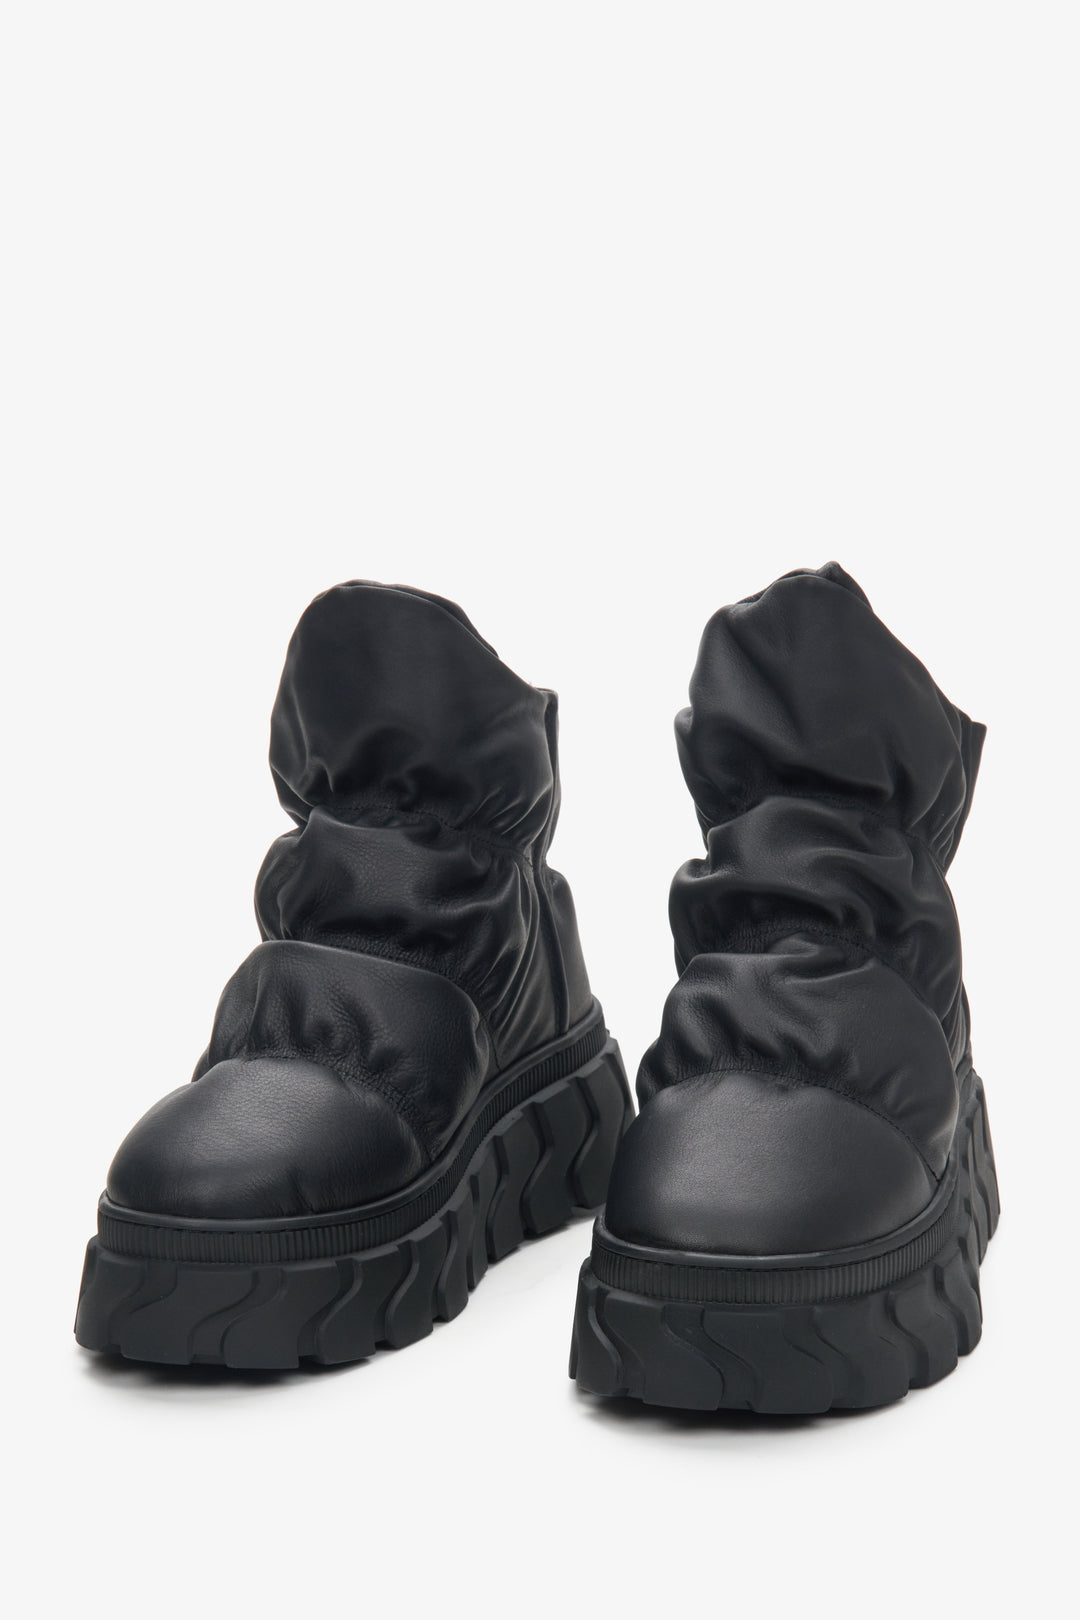 Black leather snow boots with fur lining Estro.